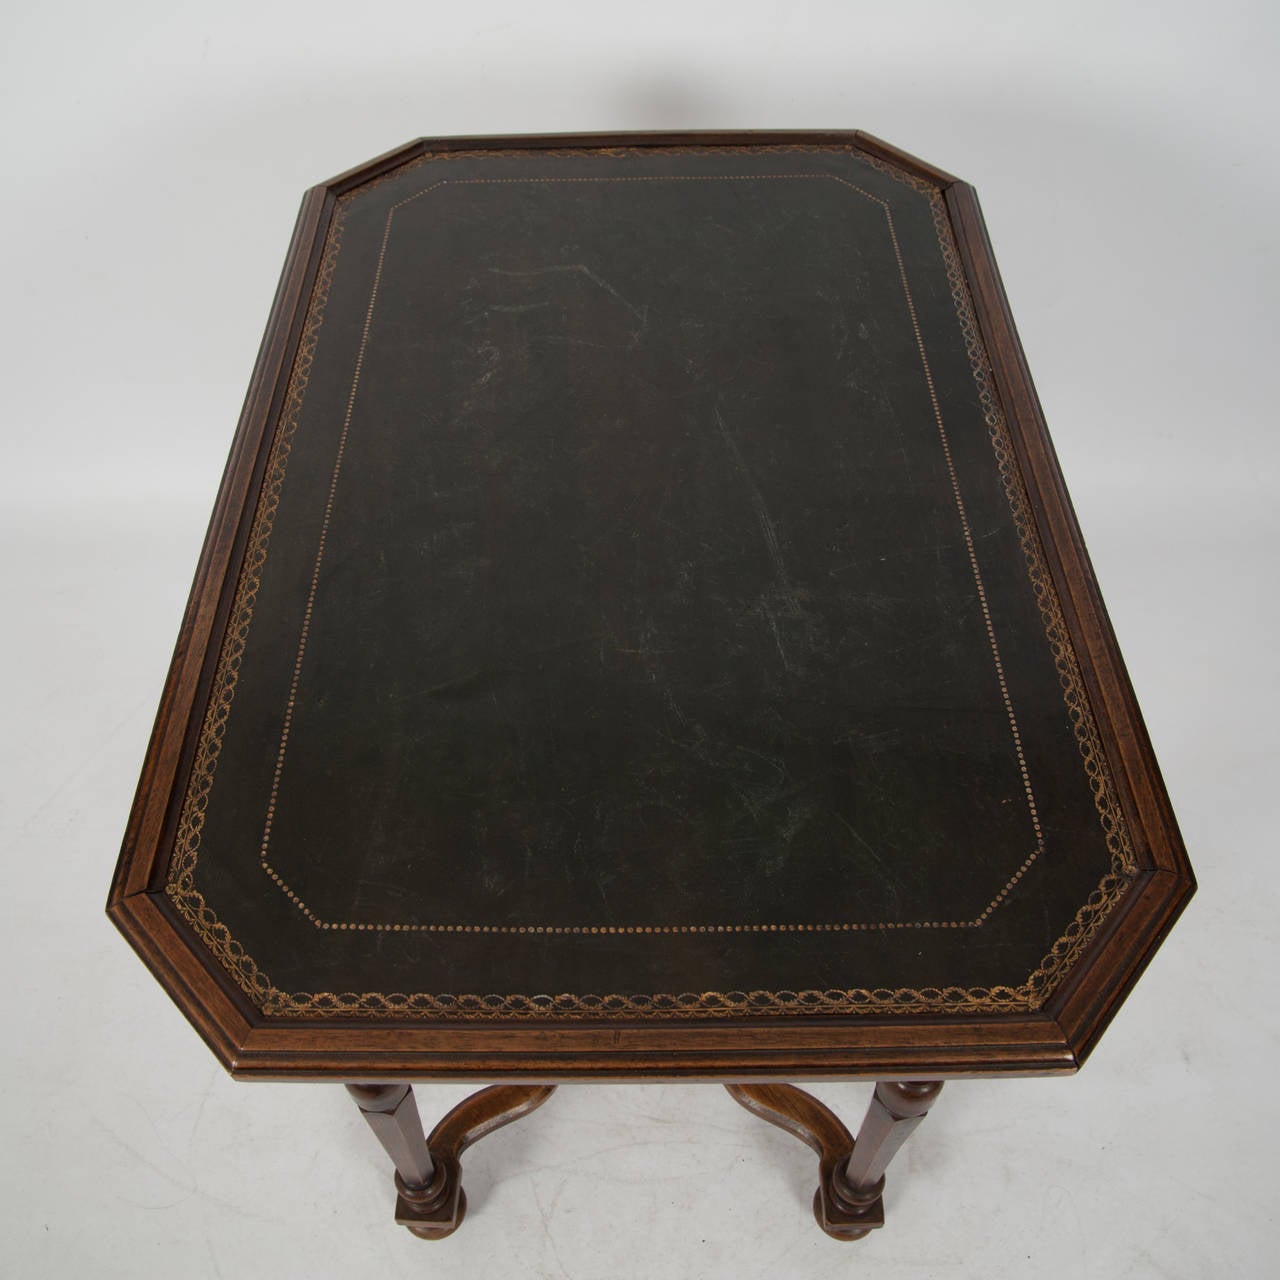 19th Century Superbly Patinated French Walnut Side Table circa 1800 with Tooled Leather Top For Sale